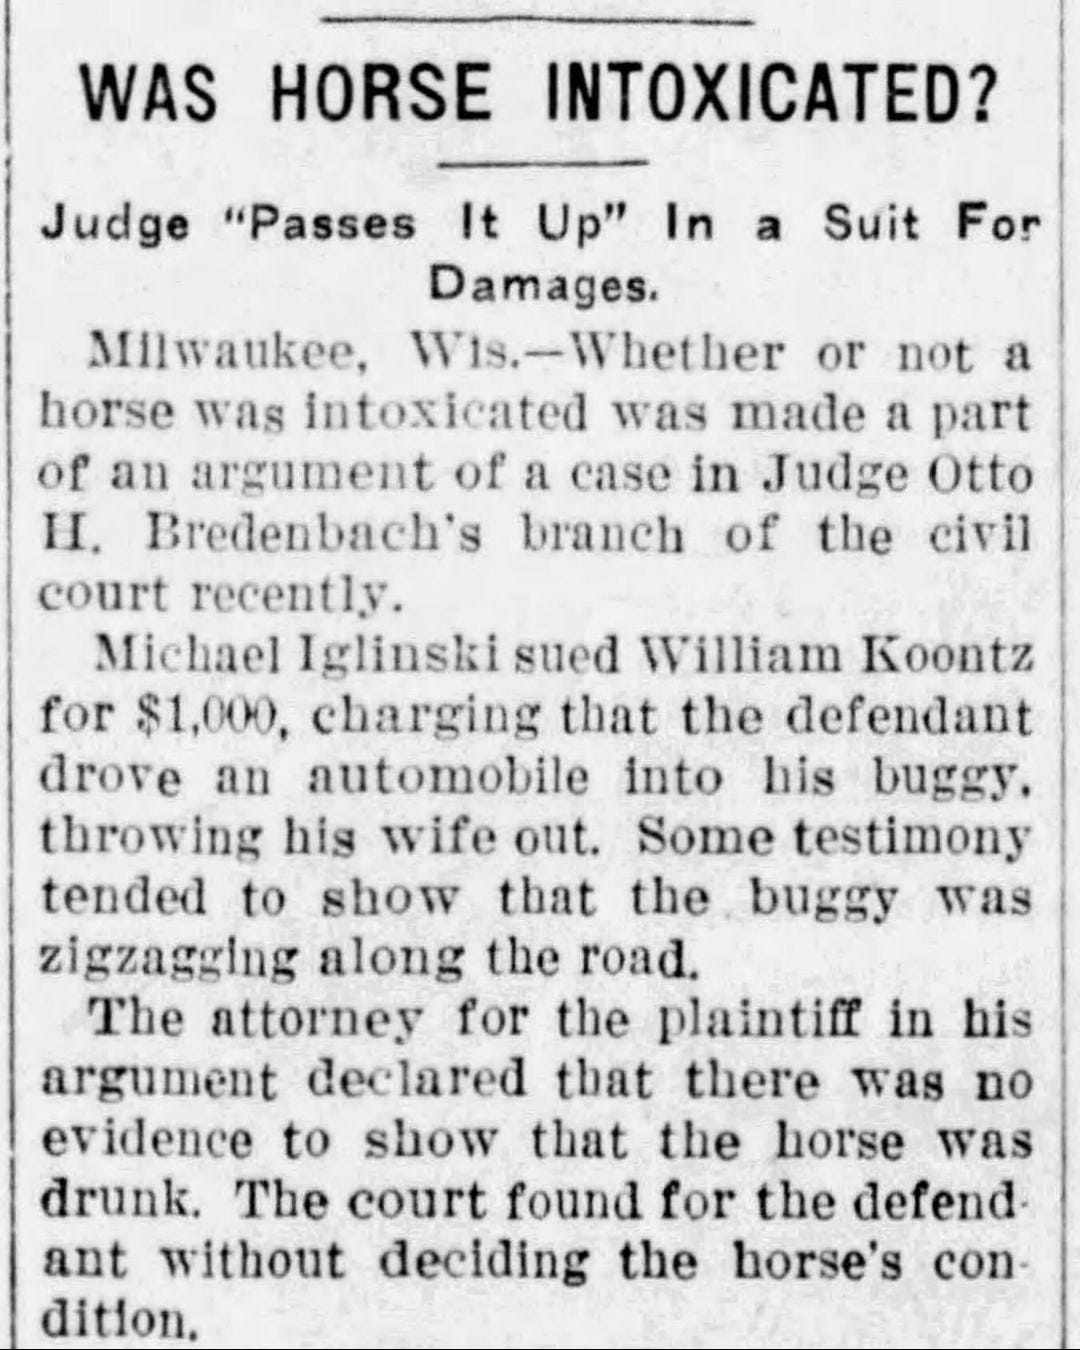 Drunk horse news article from Milwaukee, 1916